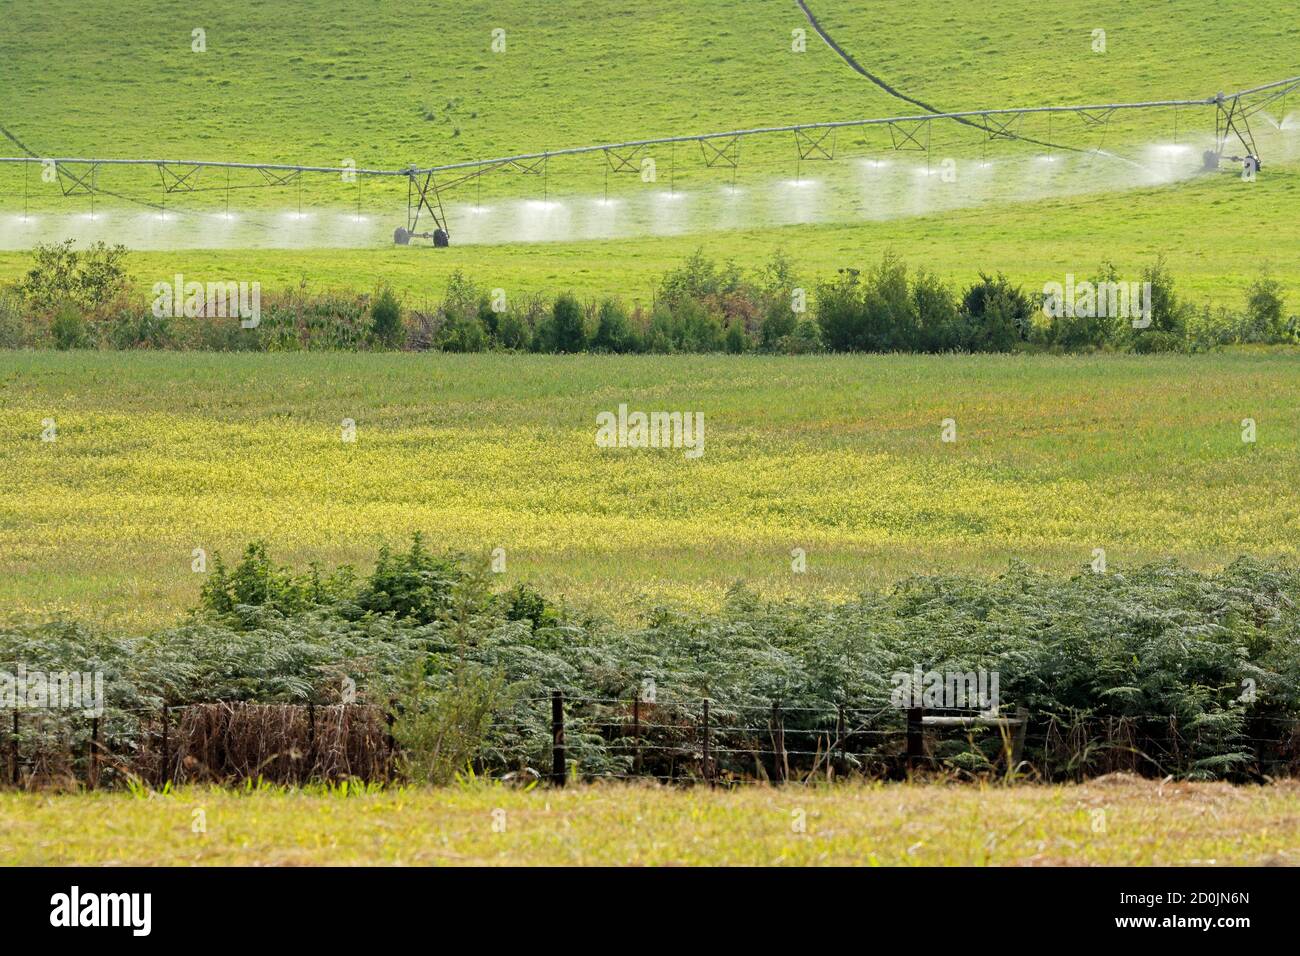 Rural farm landscape with lush green fields under irrigation, South Africa Stock Photo